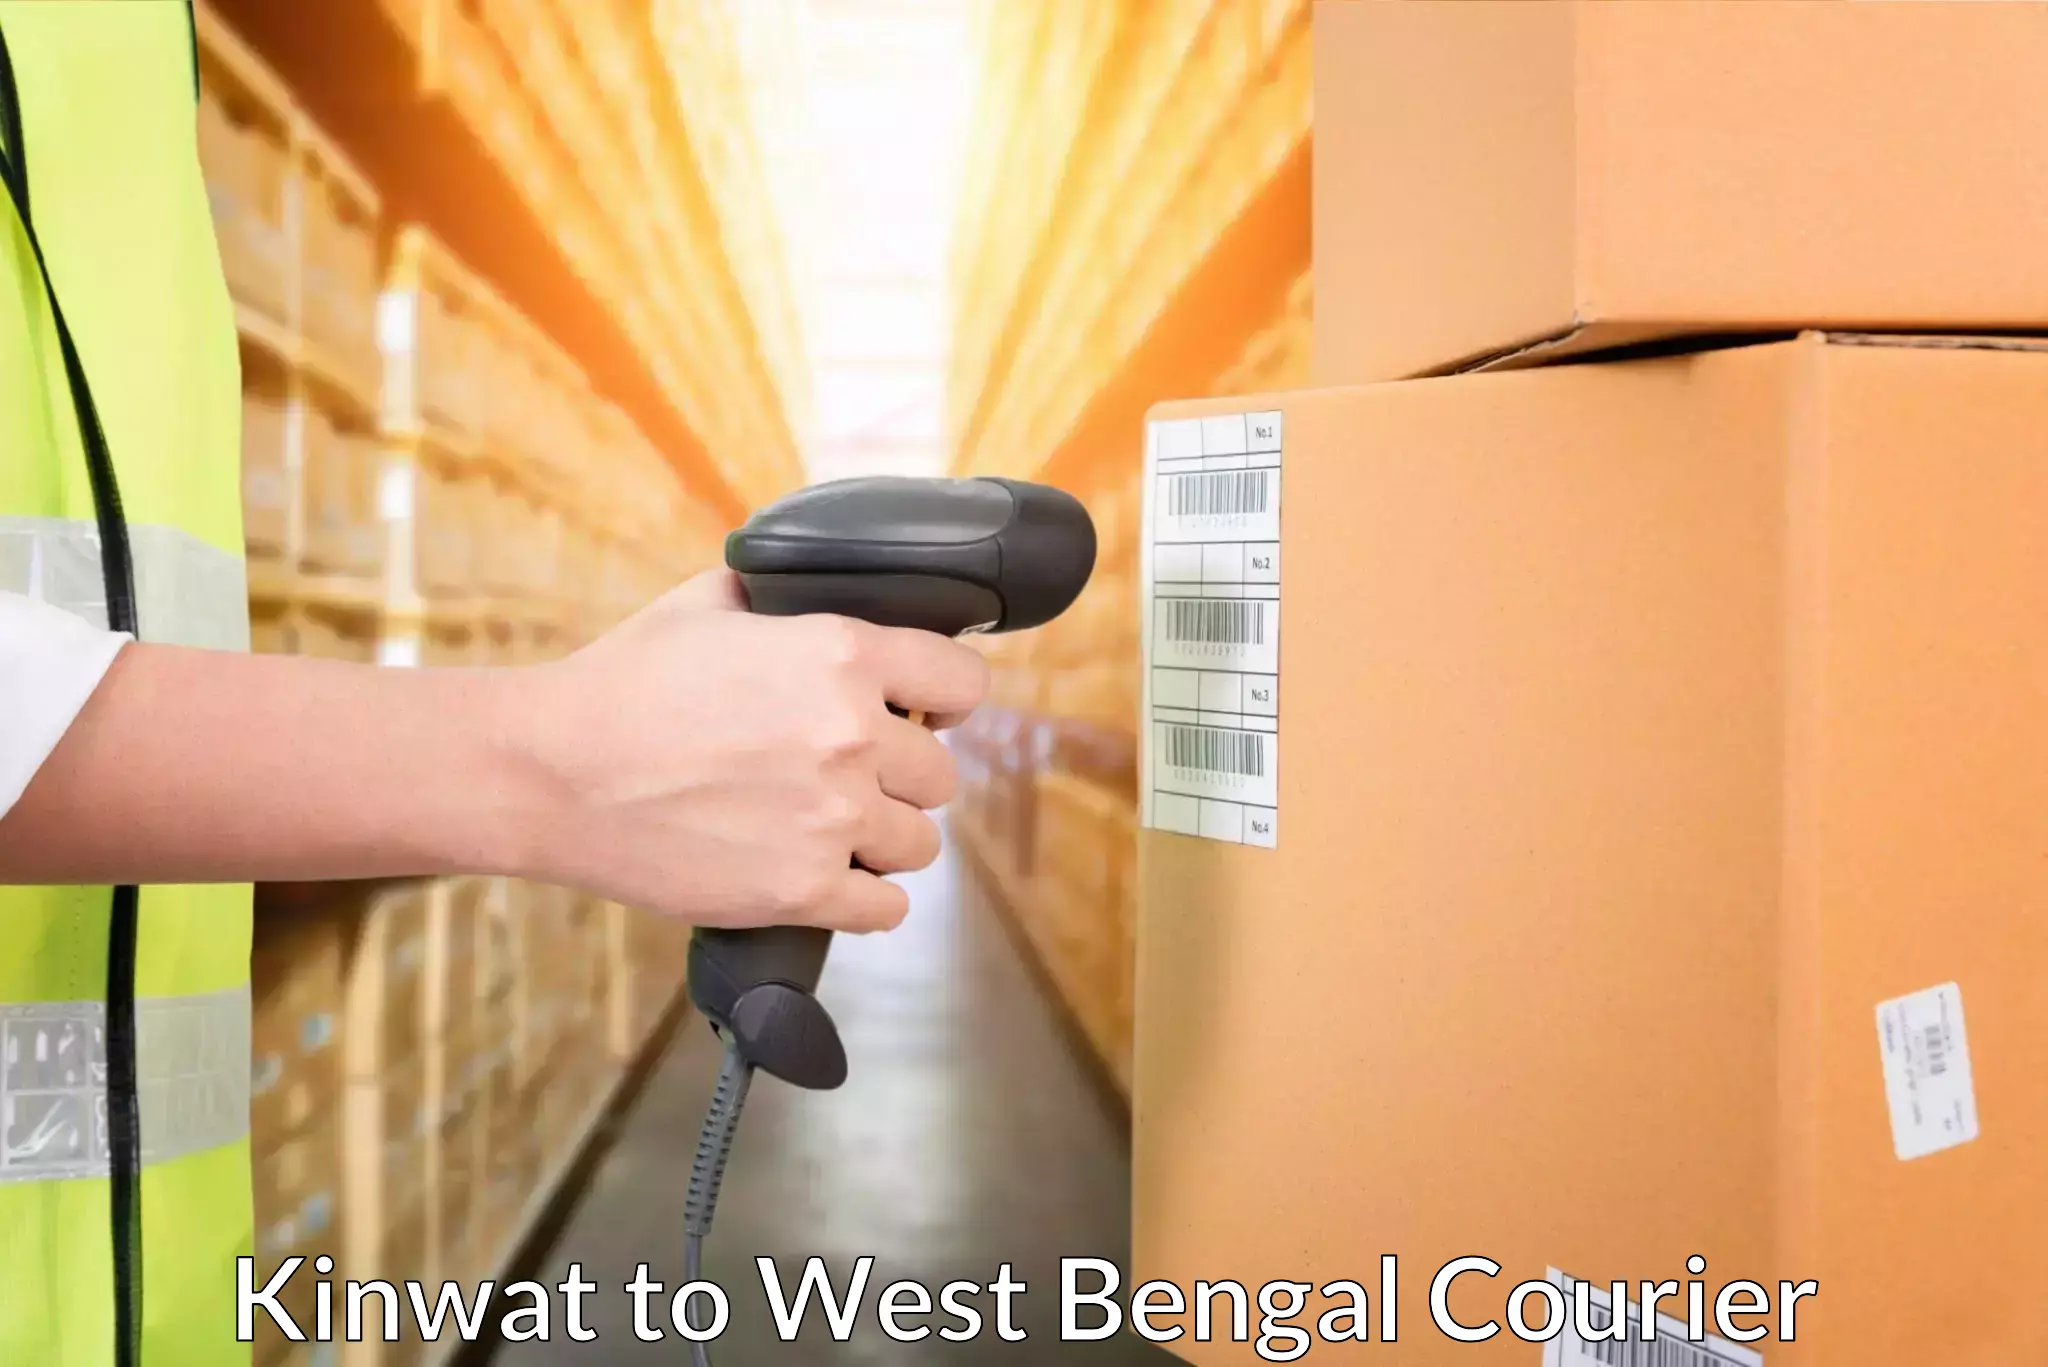 Global shipping solutions Kinwat to West Bengal